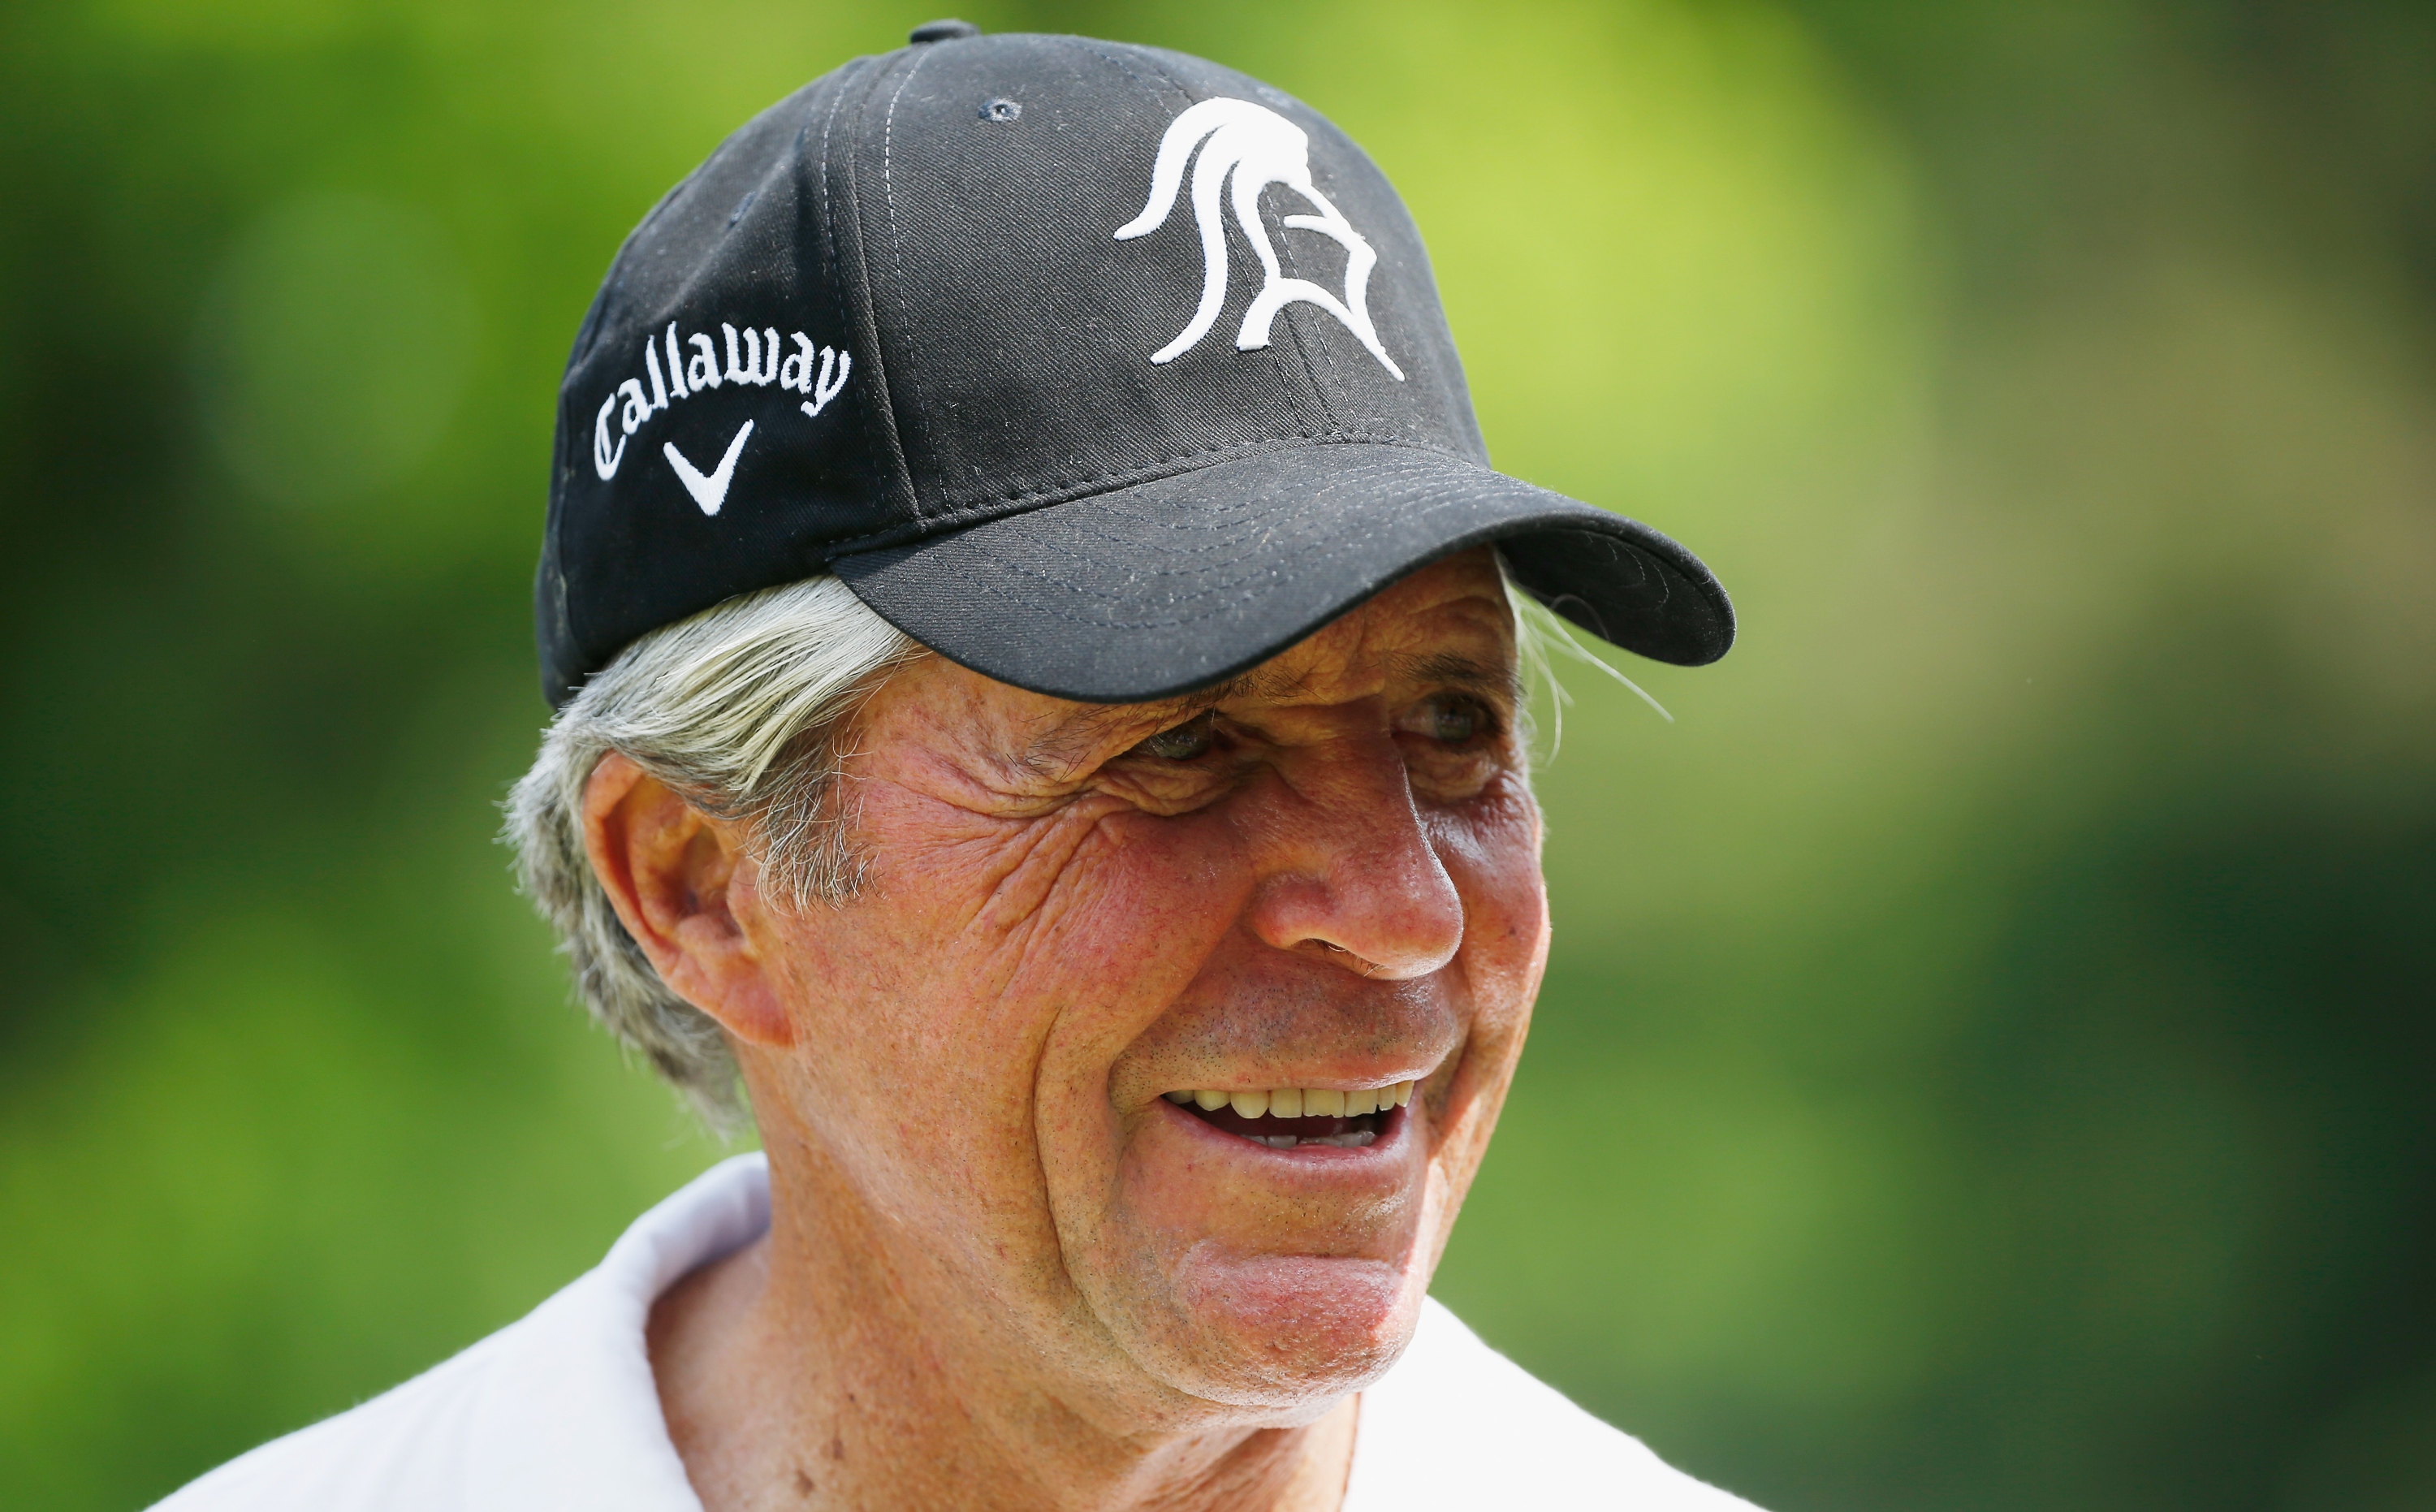 HOUSTON, TX - MAY 02: Gary Player of South Africa waits on a tee box during the 3M Greats of Golf at the Insperity Championship at The Woodlands CC on May 2, 2015 in The Woodlands, Texas. (Photo by Scott Halleran/Getty Images)